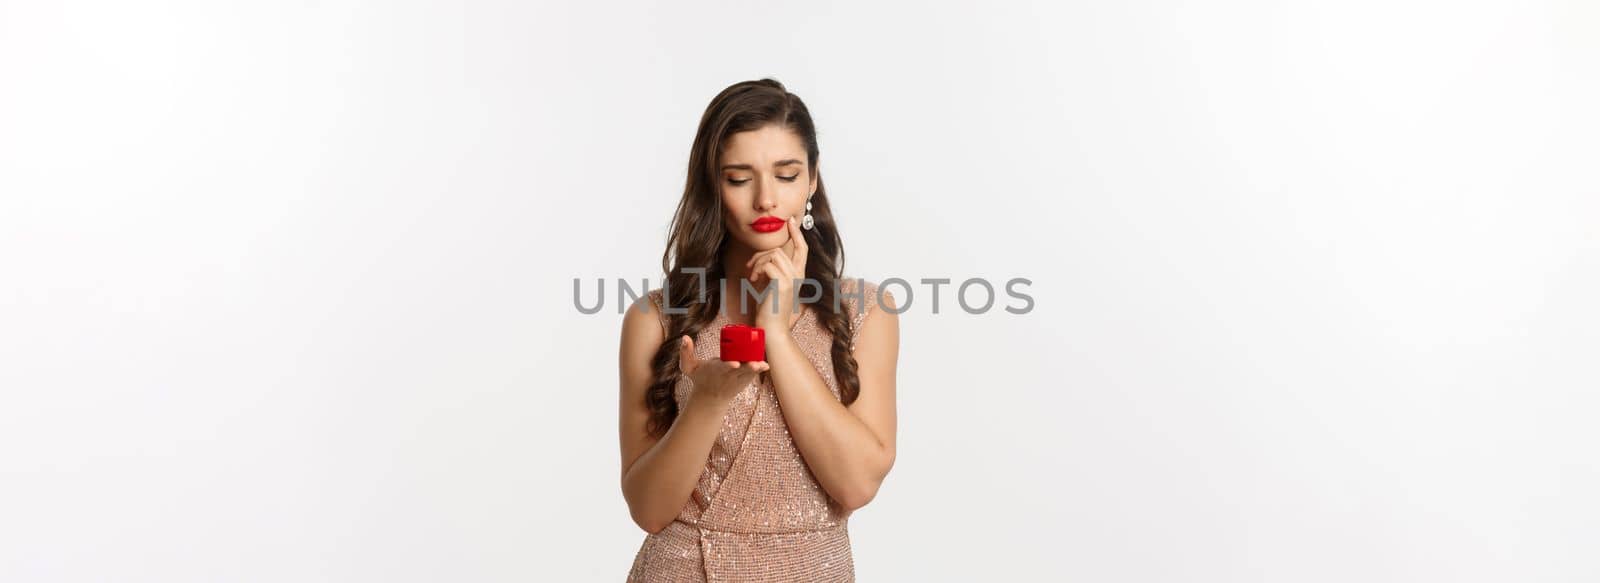 Image of beautiful woman thinking about marriage proposal, looking at engagement ring box and thinking, standing over white background in glamour dress.